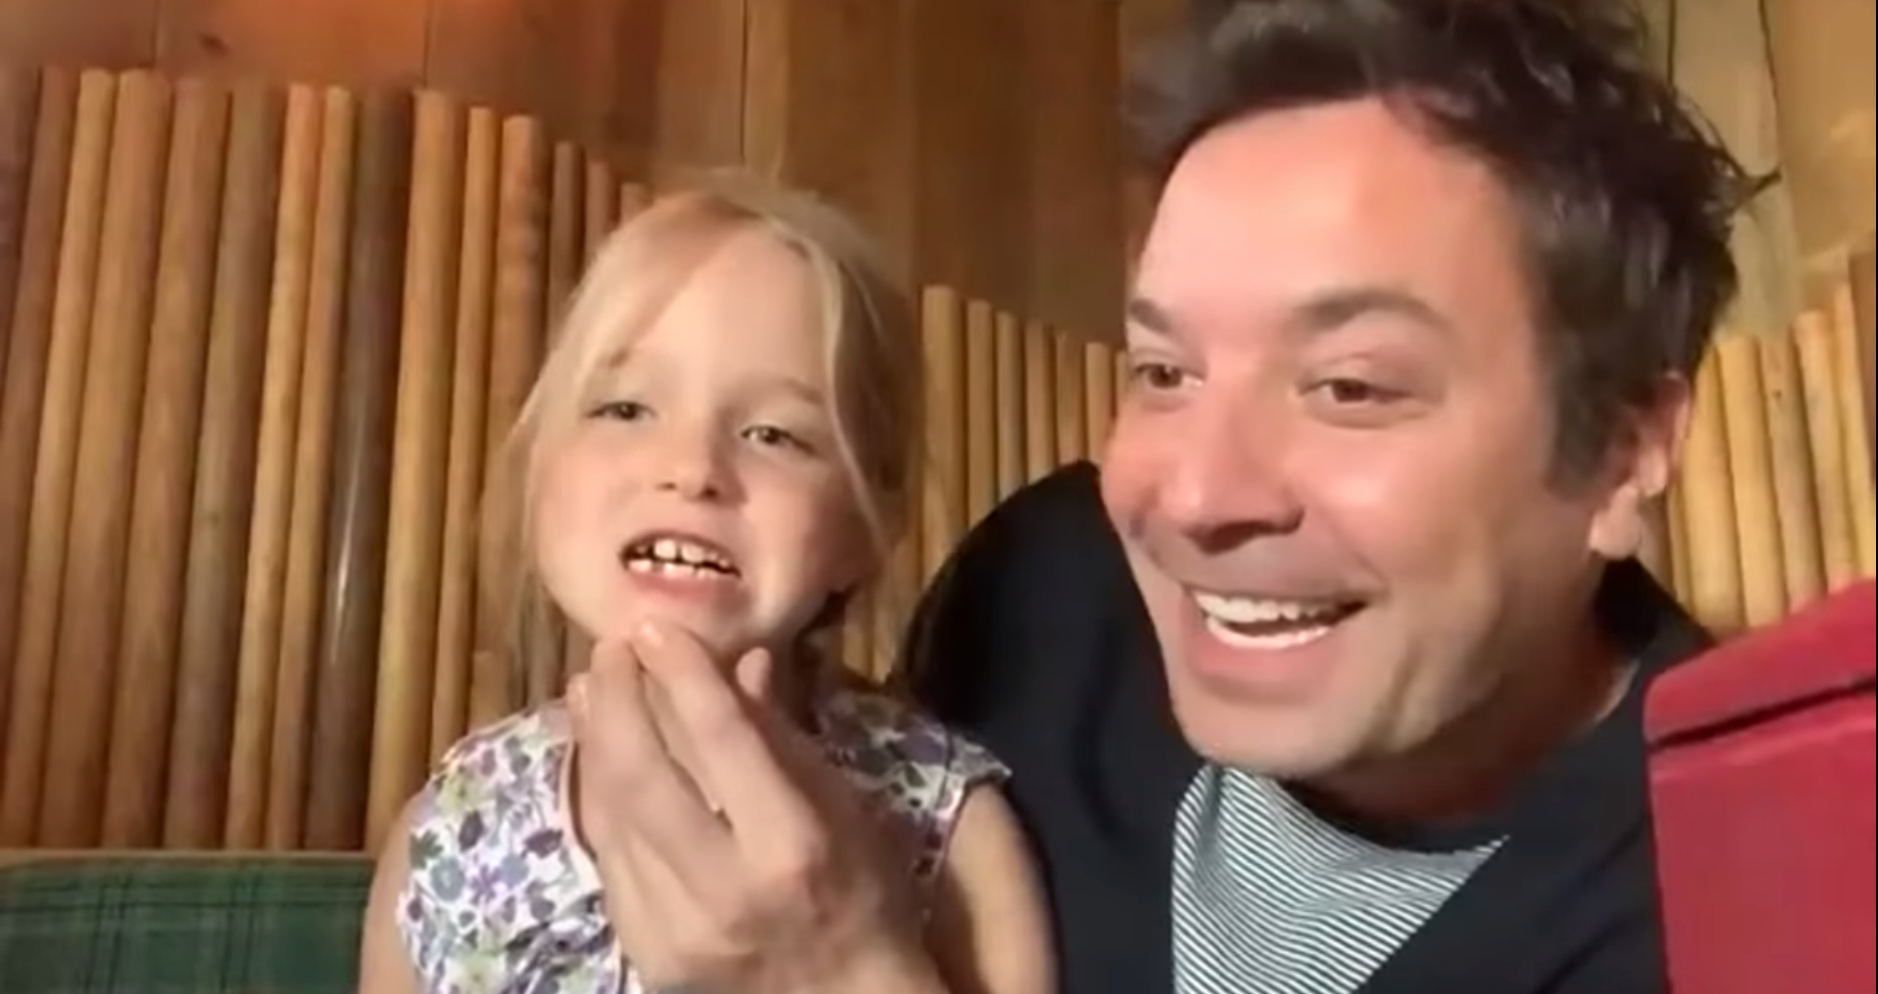 Jimmy Fallon and his daughter